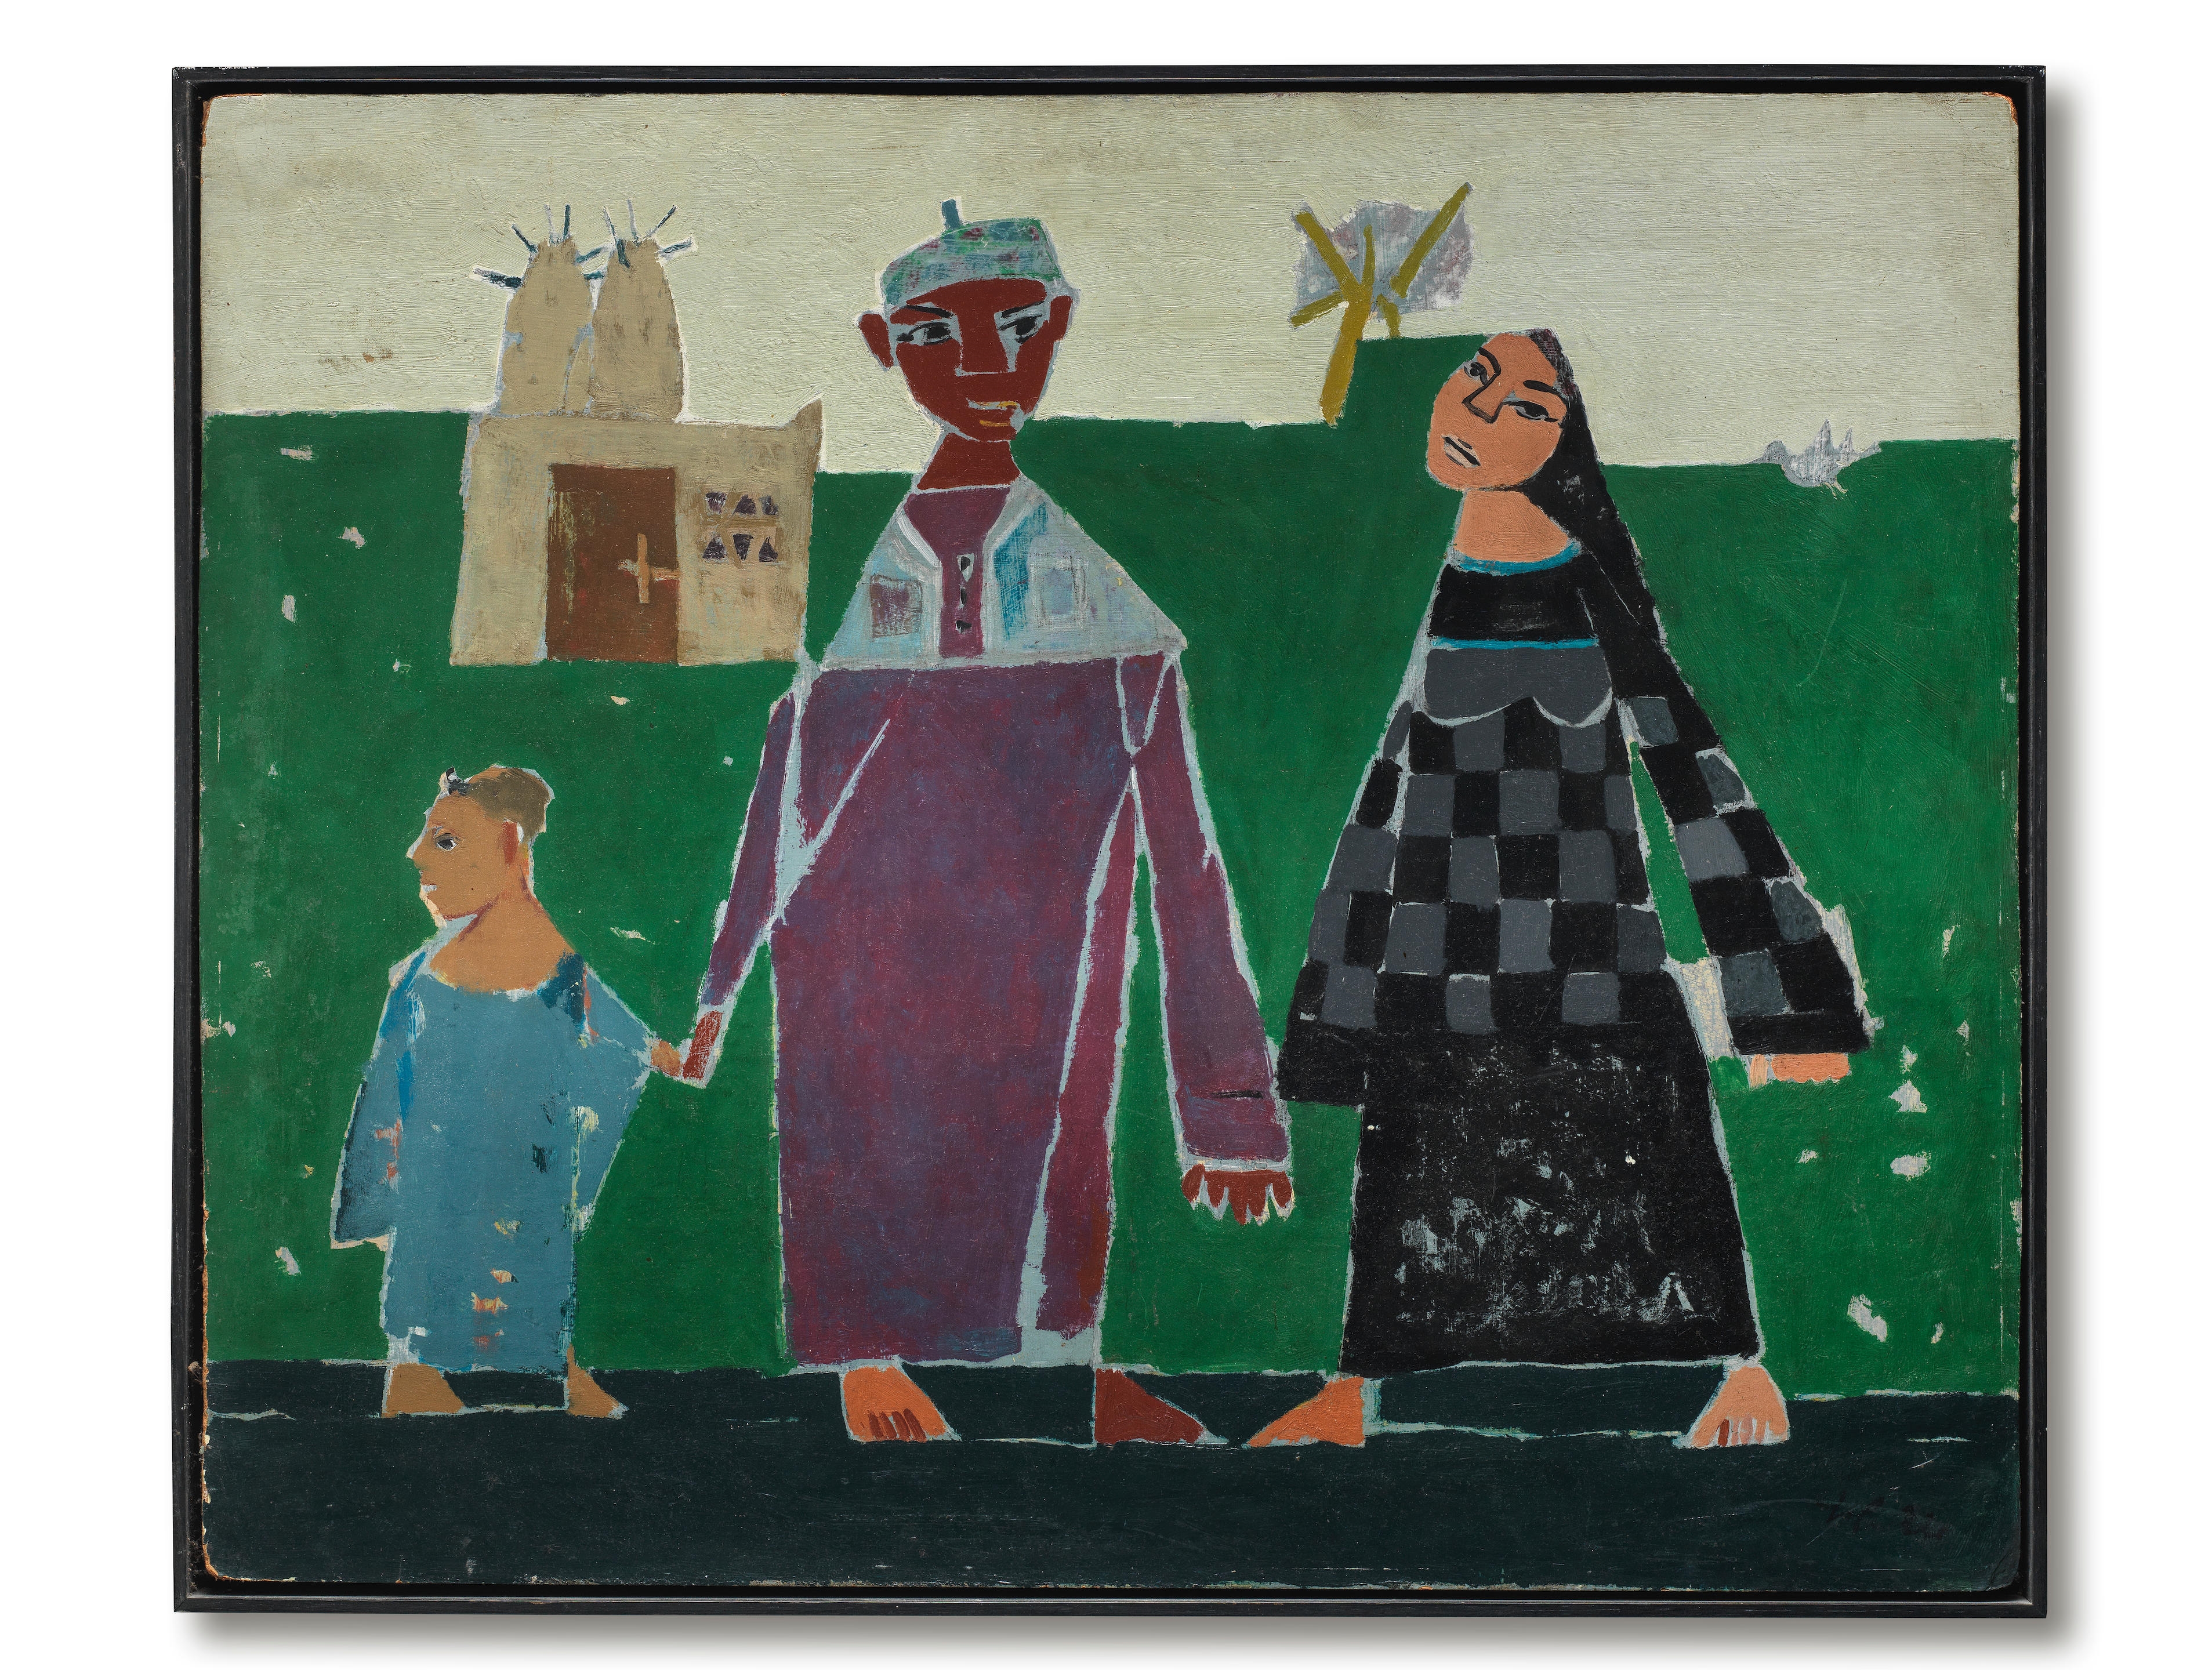 The Family (A'elah) by Hamed Abdallah, executed circa early 1950s